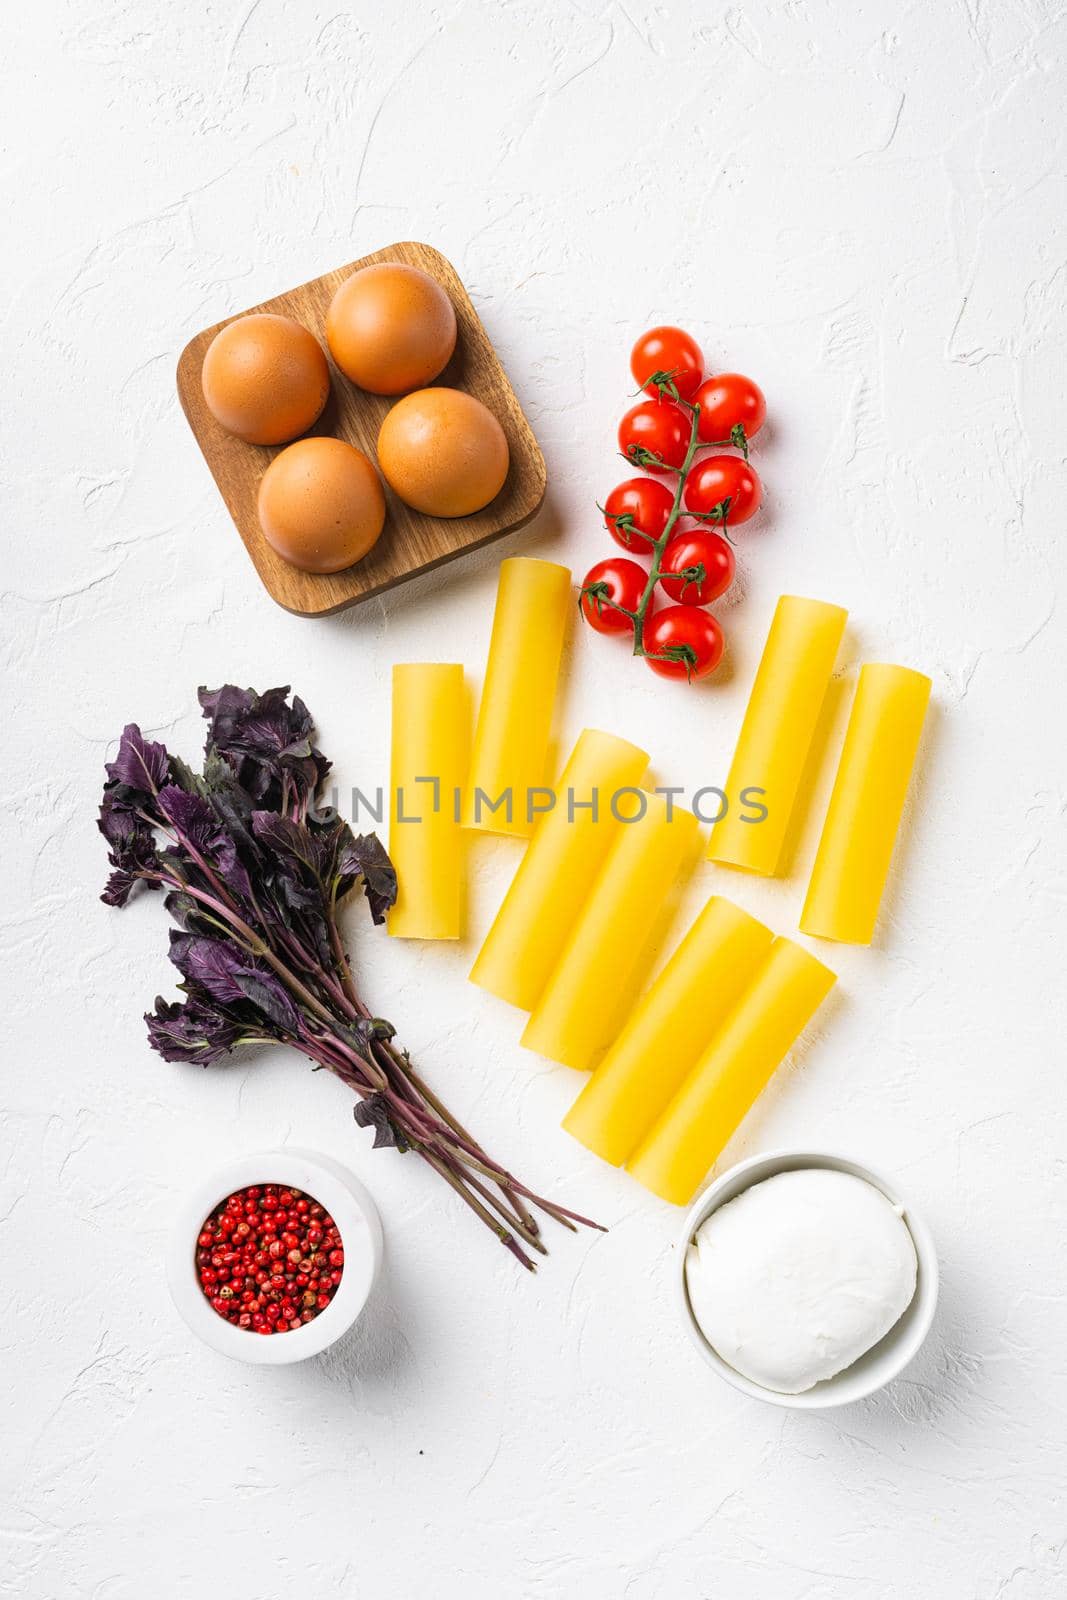 Cannelloni with ingredients set, on white stone table background, top view flat lay